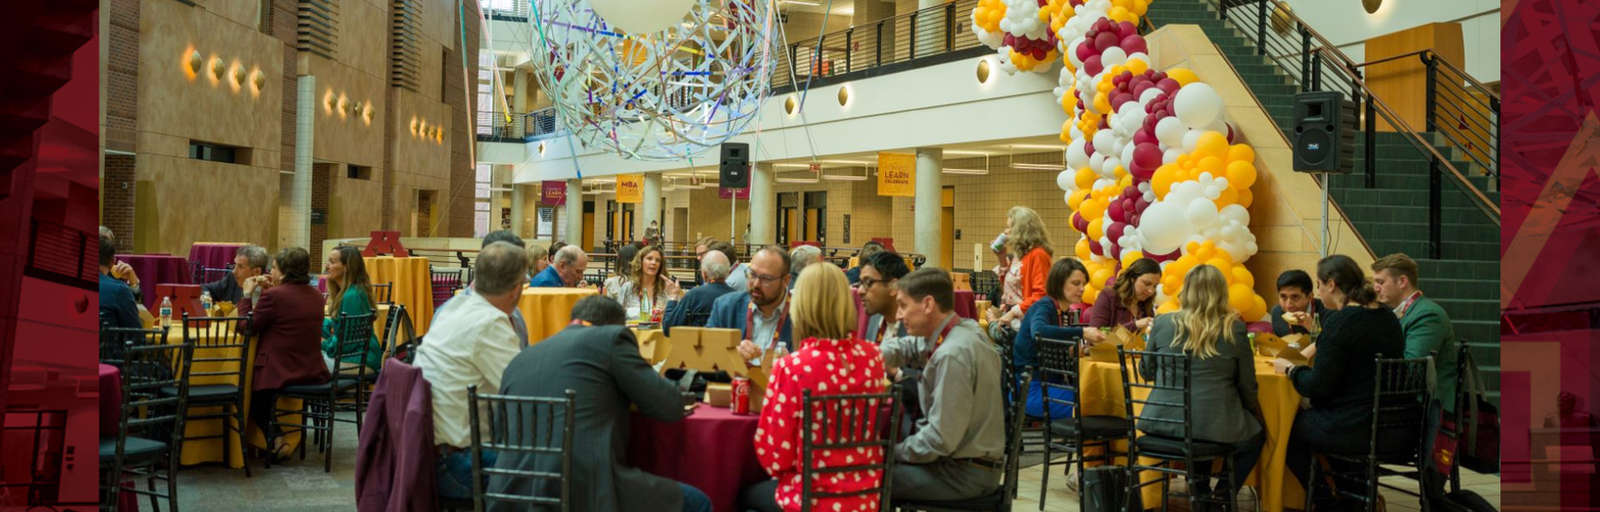 Alumni sitting at tables in the Carlson School atrium, with balloons and other maroon and gold decorations.